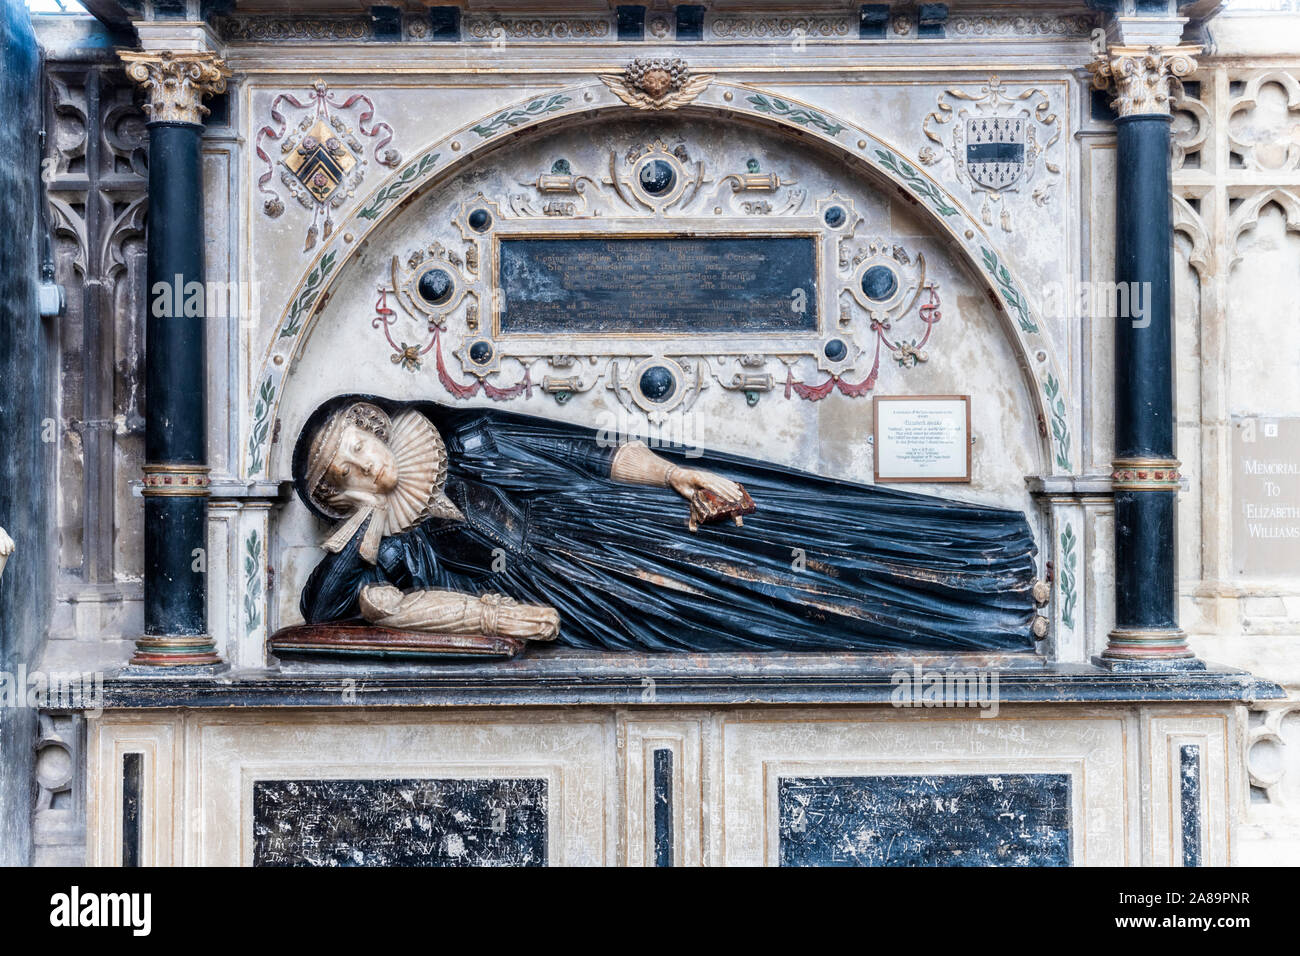 Memorial in Gloucester Cathedral UK - Elizabeth Williams died in childbirth at the age of 17 in 1622.   Note effigy of her baby in its chrisom shroud. Stock Photo